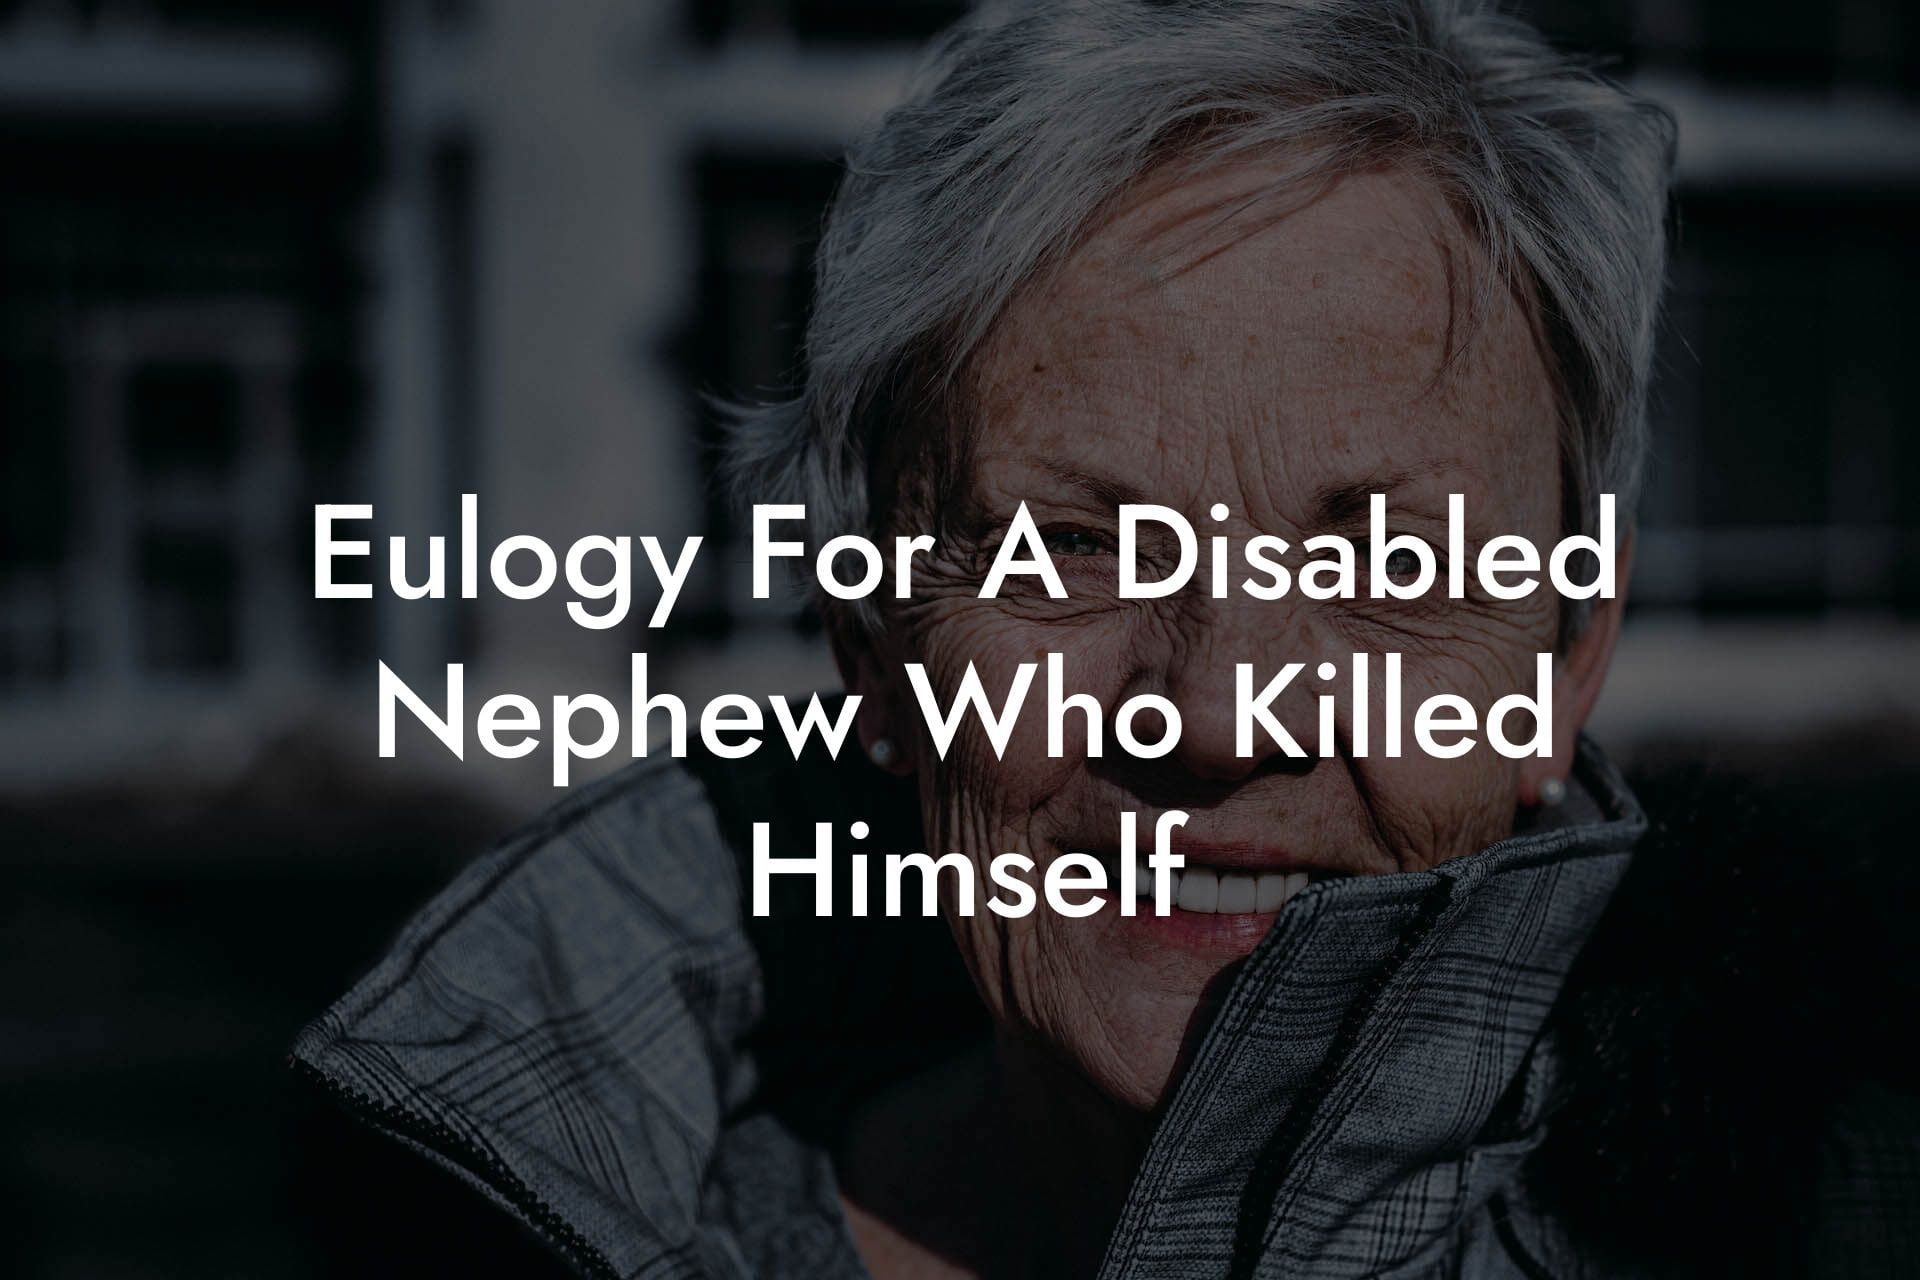 Eulogy For A Disabled Nephew Who Killed Himself